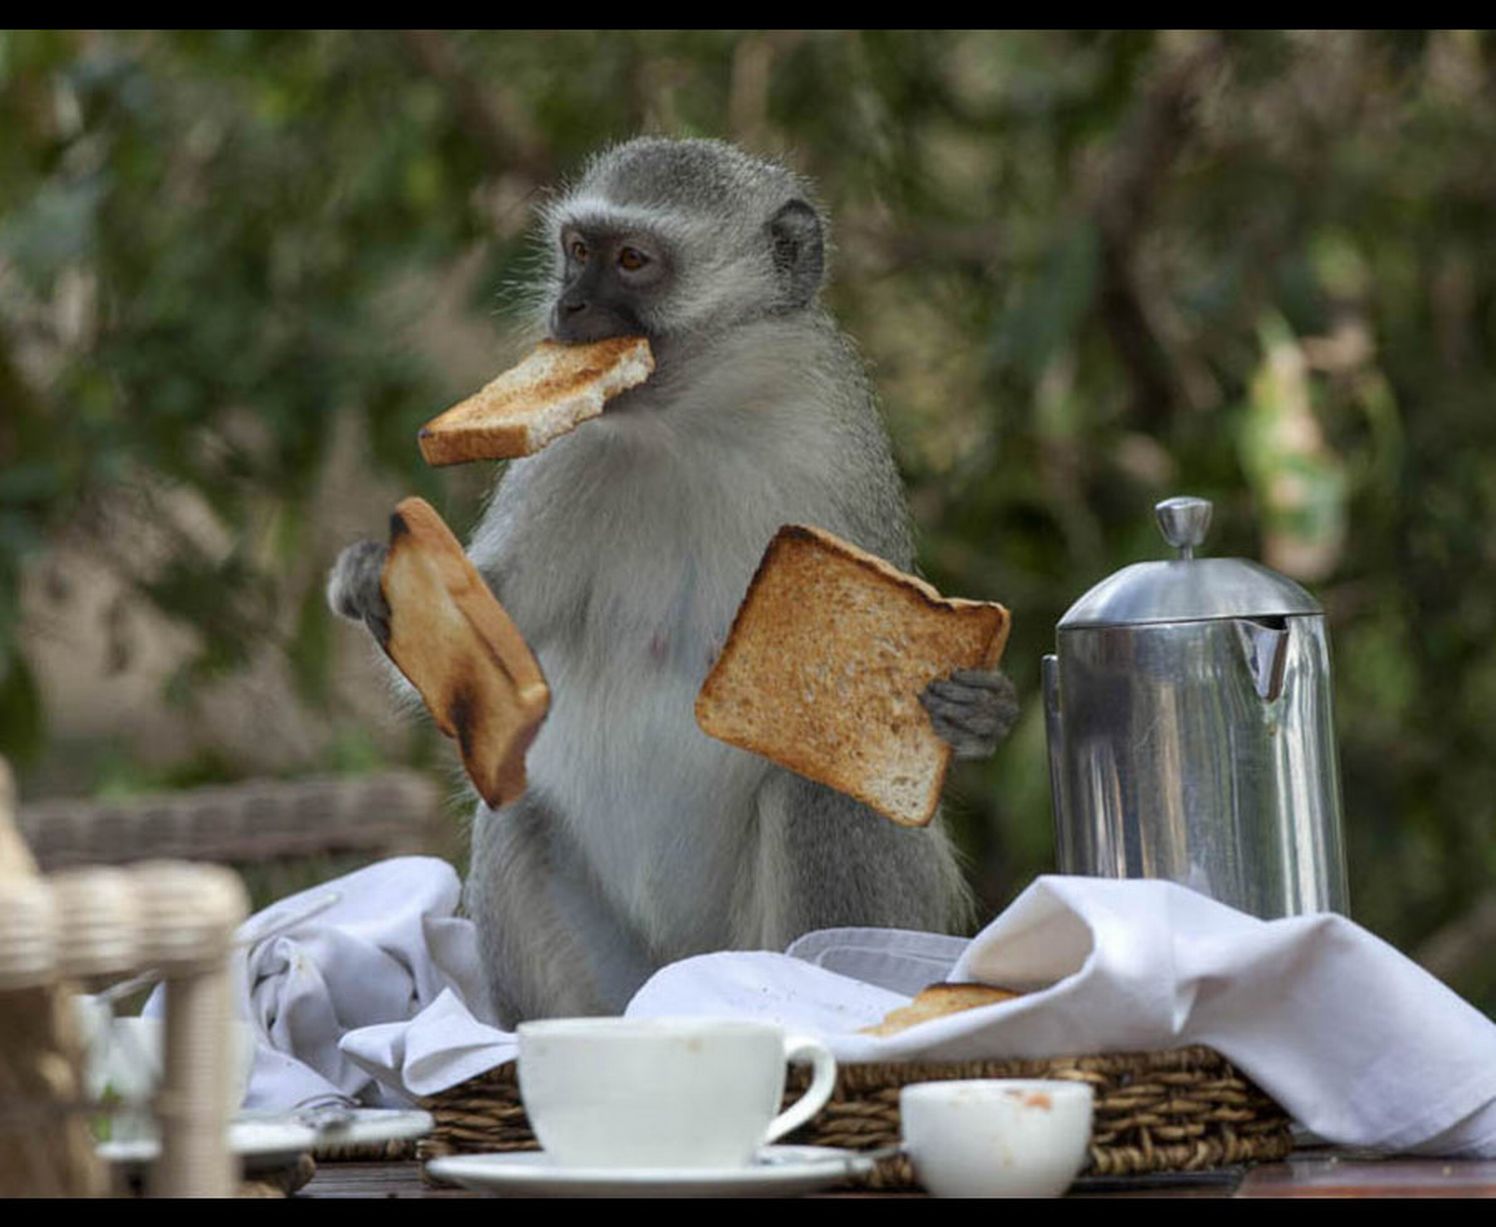 This cheeky monkey steals toast from a family in South Africa